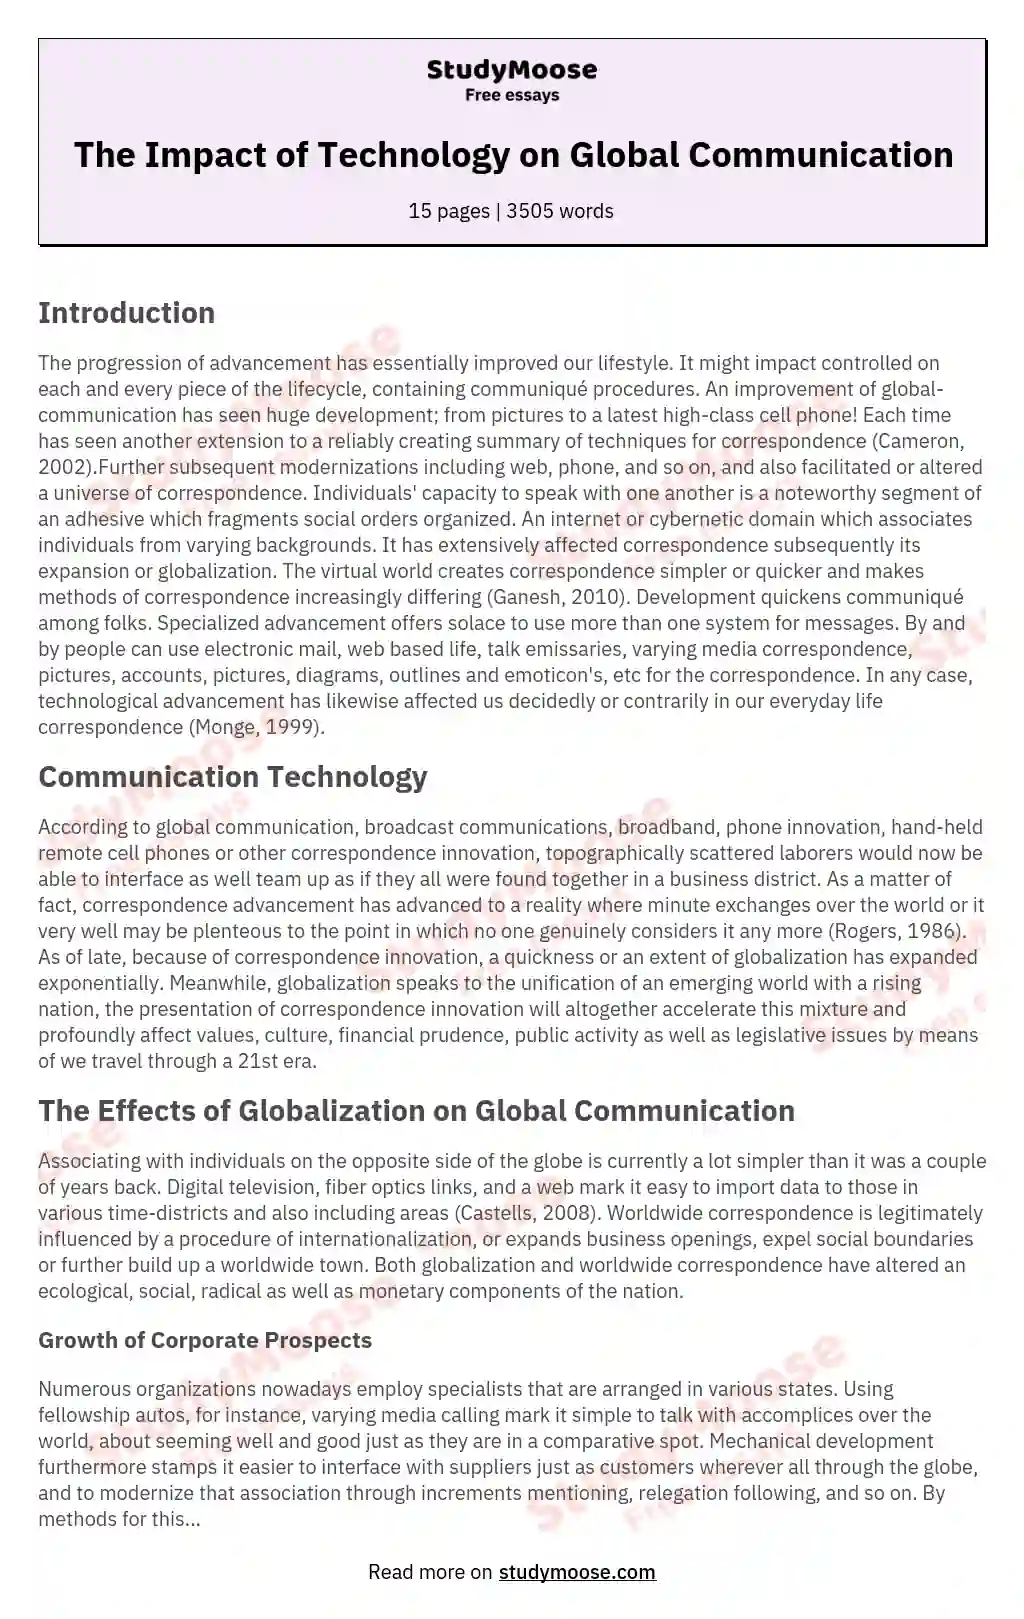 The Impact of Technology on Global Communication essay